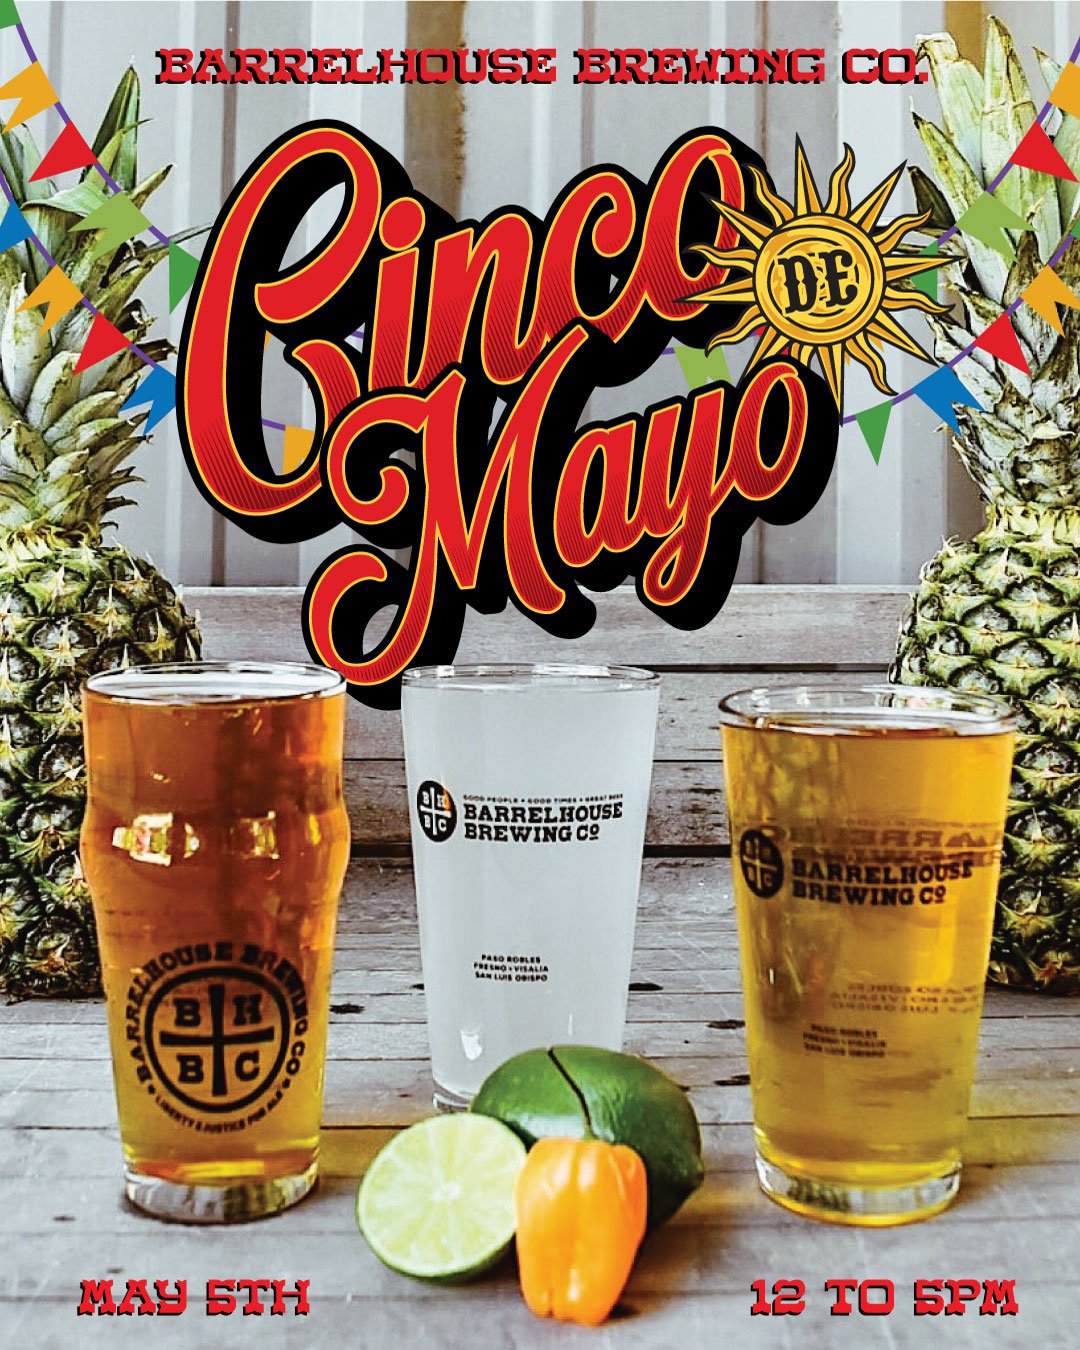 Celebrate Cinco de Mayo with these festive new beers that pair perfectly with your favorite Mexican dishes. Available at all our taprooms starting today!

KEY LAGER - A refreshing twist on our classic lager infused with a splash of zesty lime. It's c